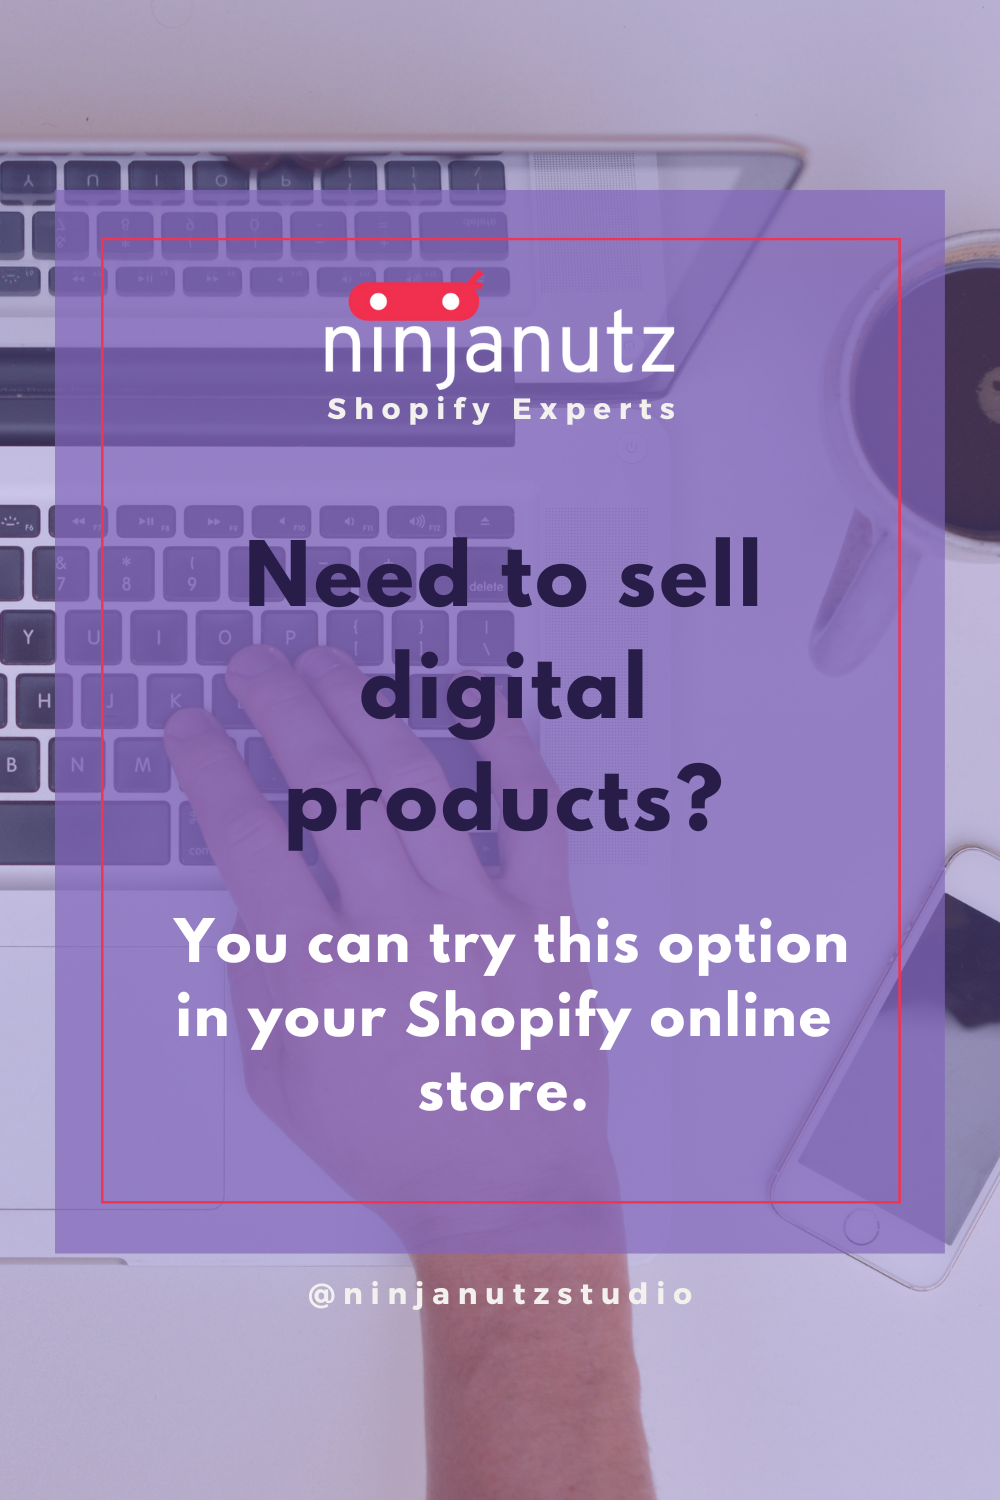 Need to sell digital products? You can try this option in your Shopify online store NinjaNutz®